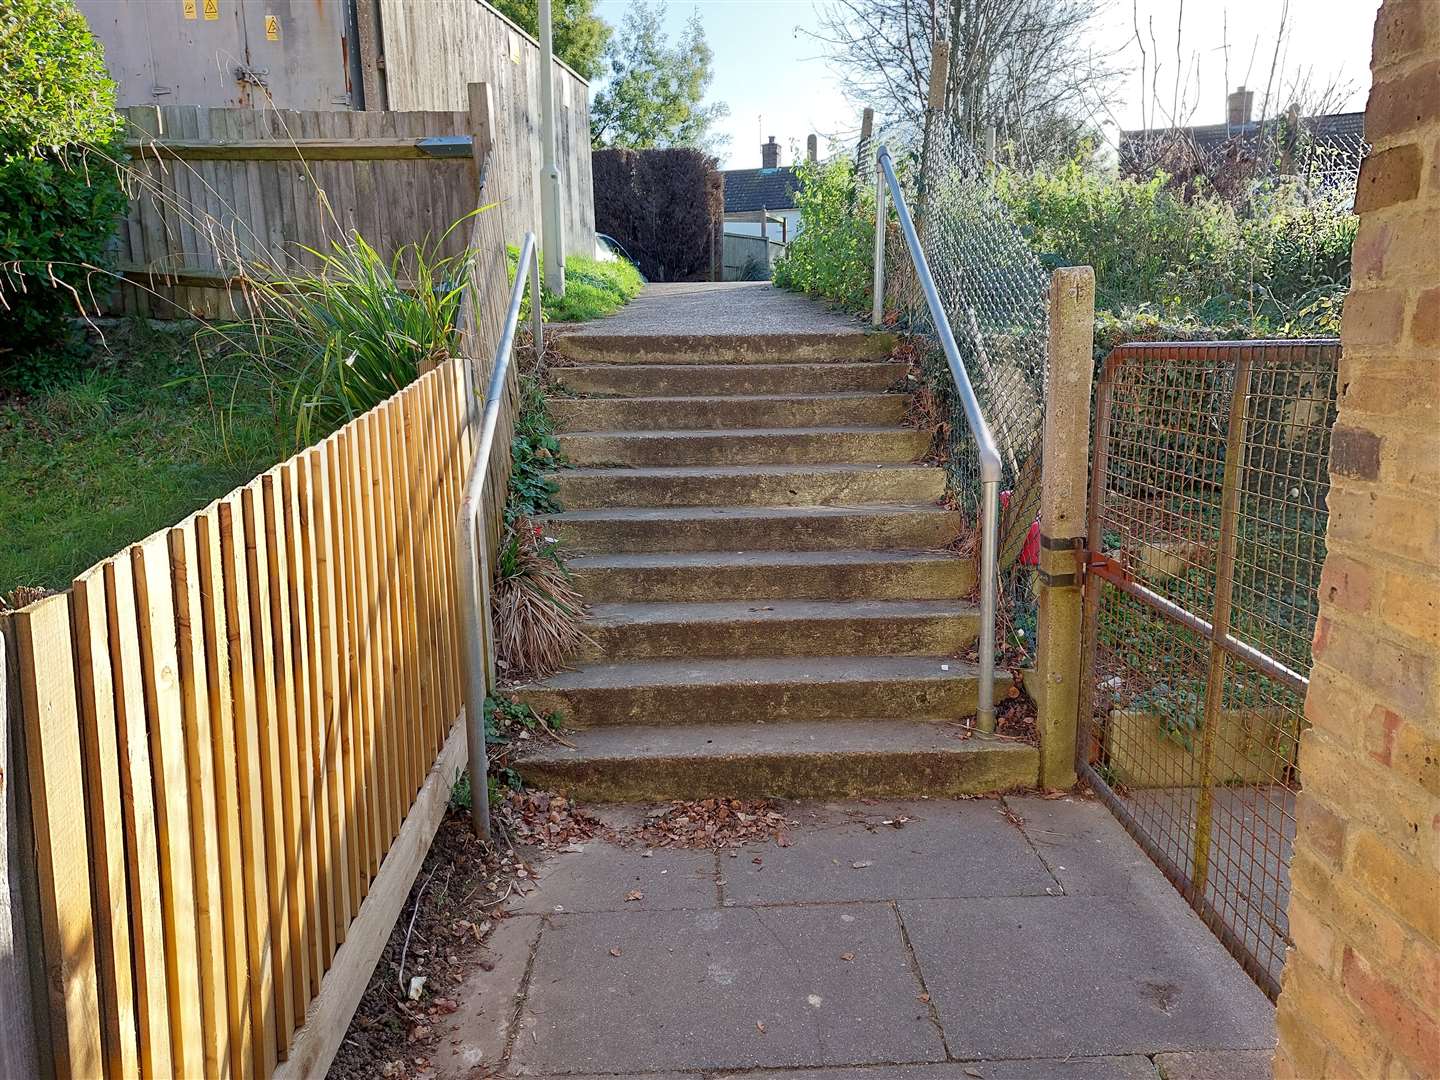 The car park at the rear of the shops has no disability access